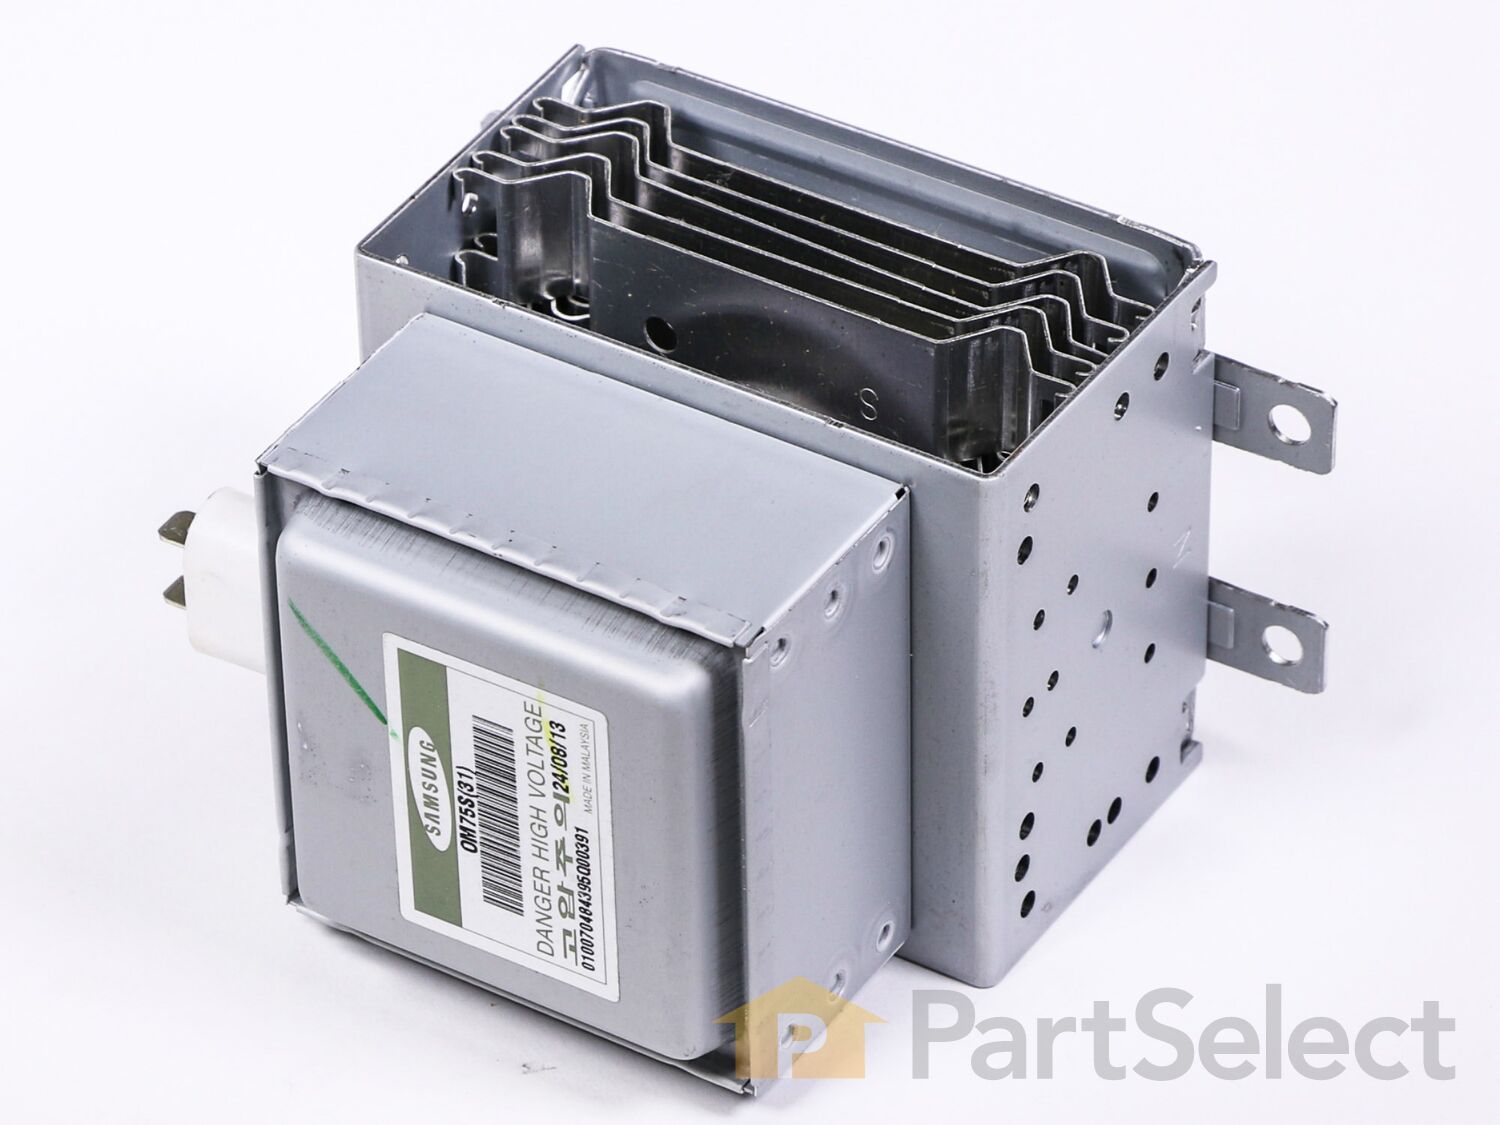 Details about   Replacement Magnetron For GE Microwave WB27X10585 AP3191536 PS239727 By OEM MFR 